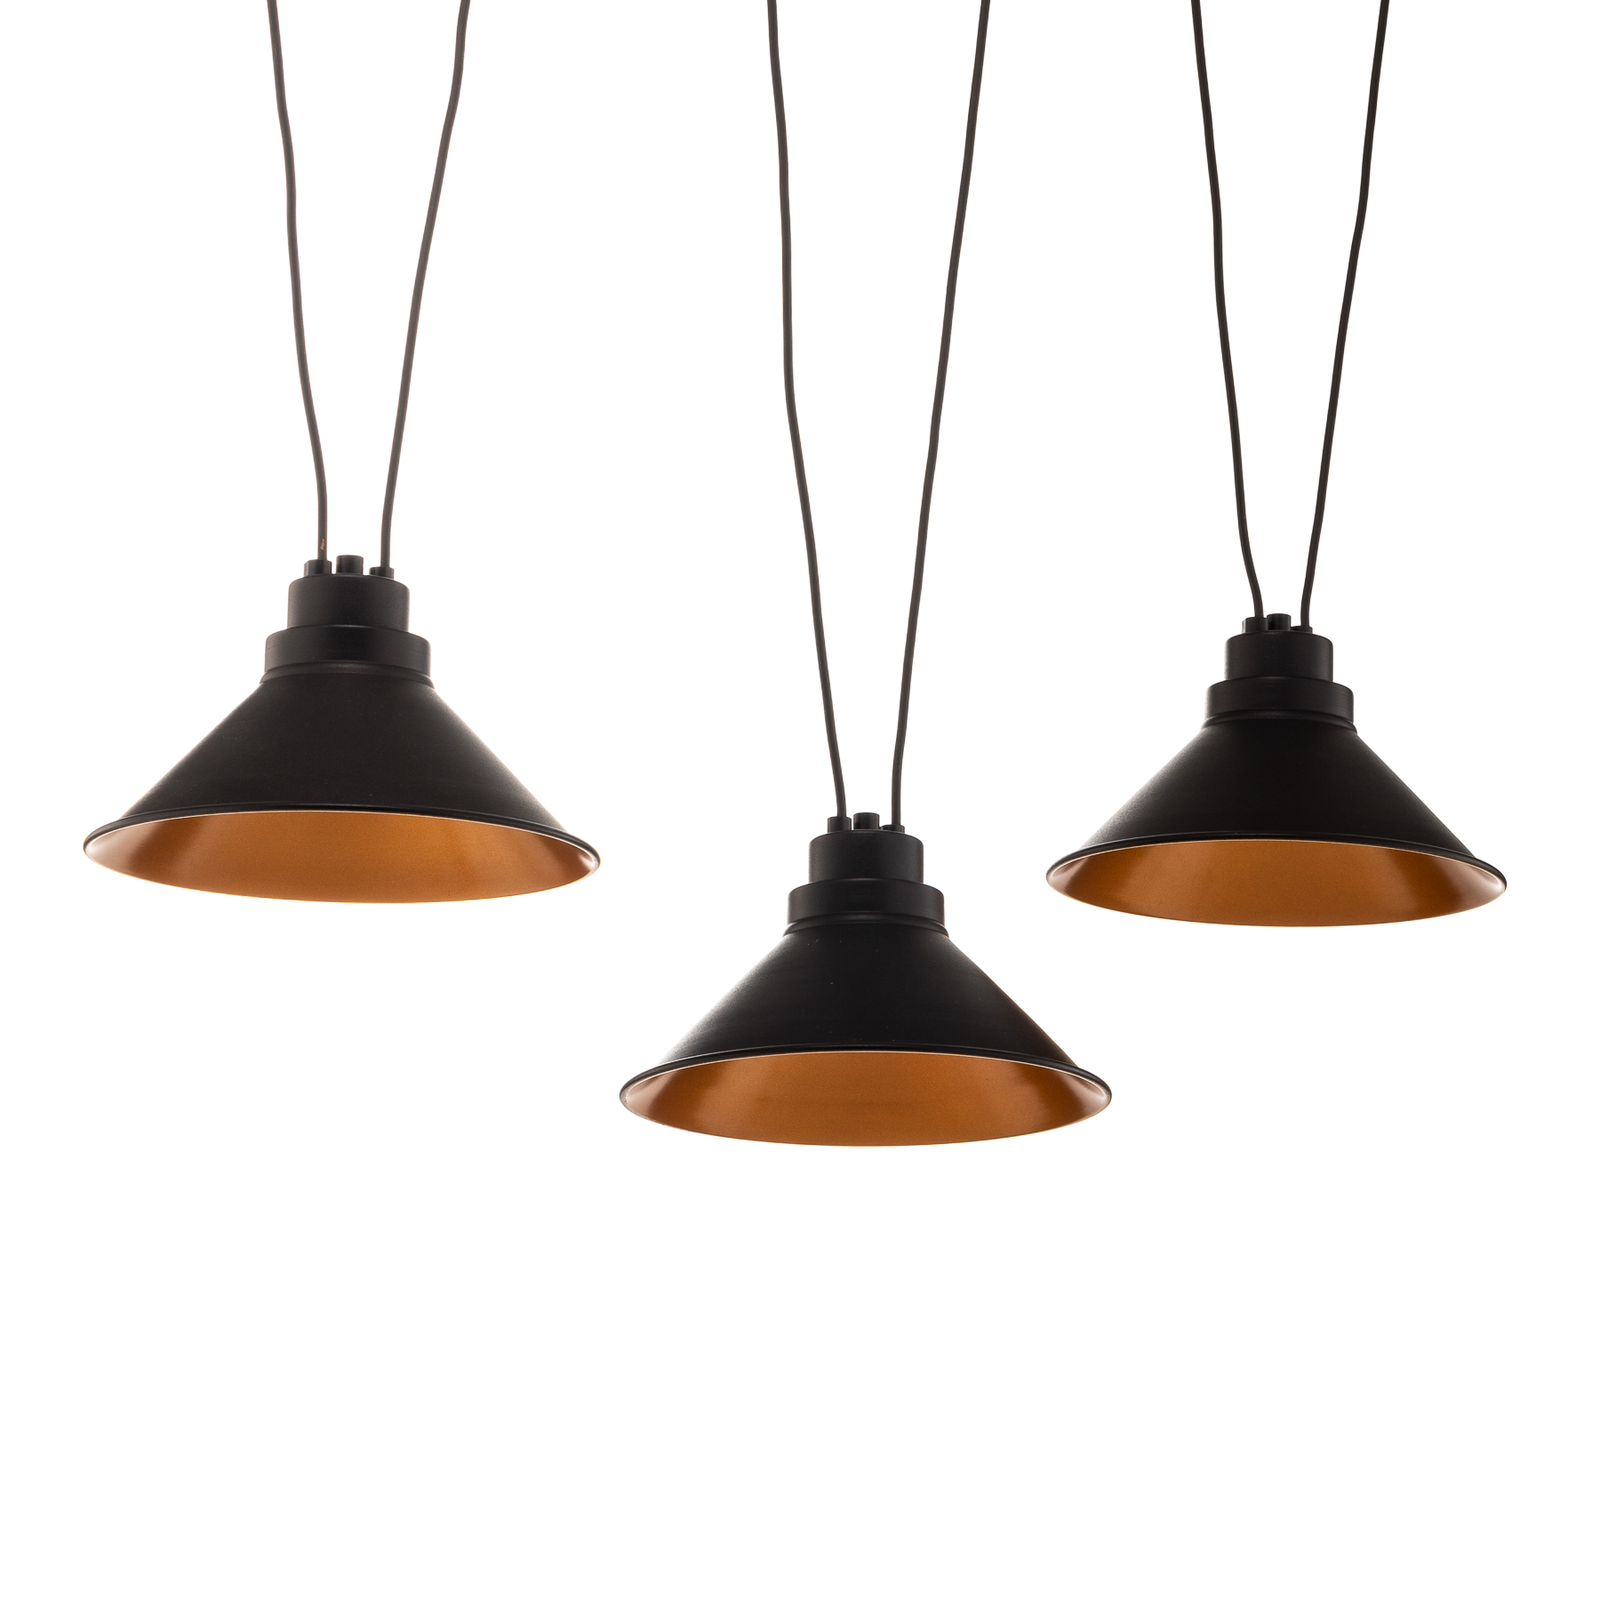 Perm III hanging light black, can be mounted variably